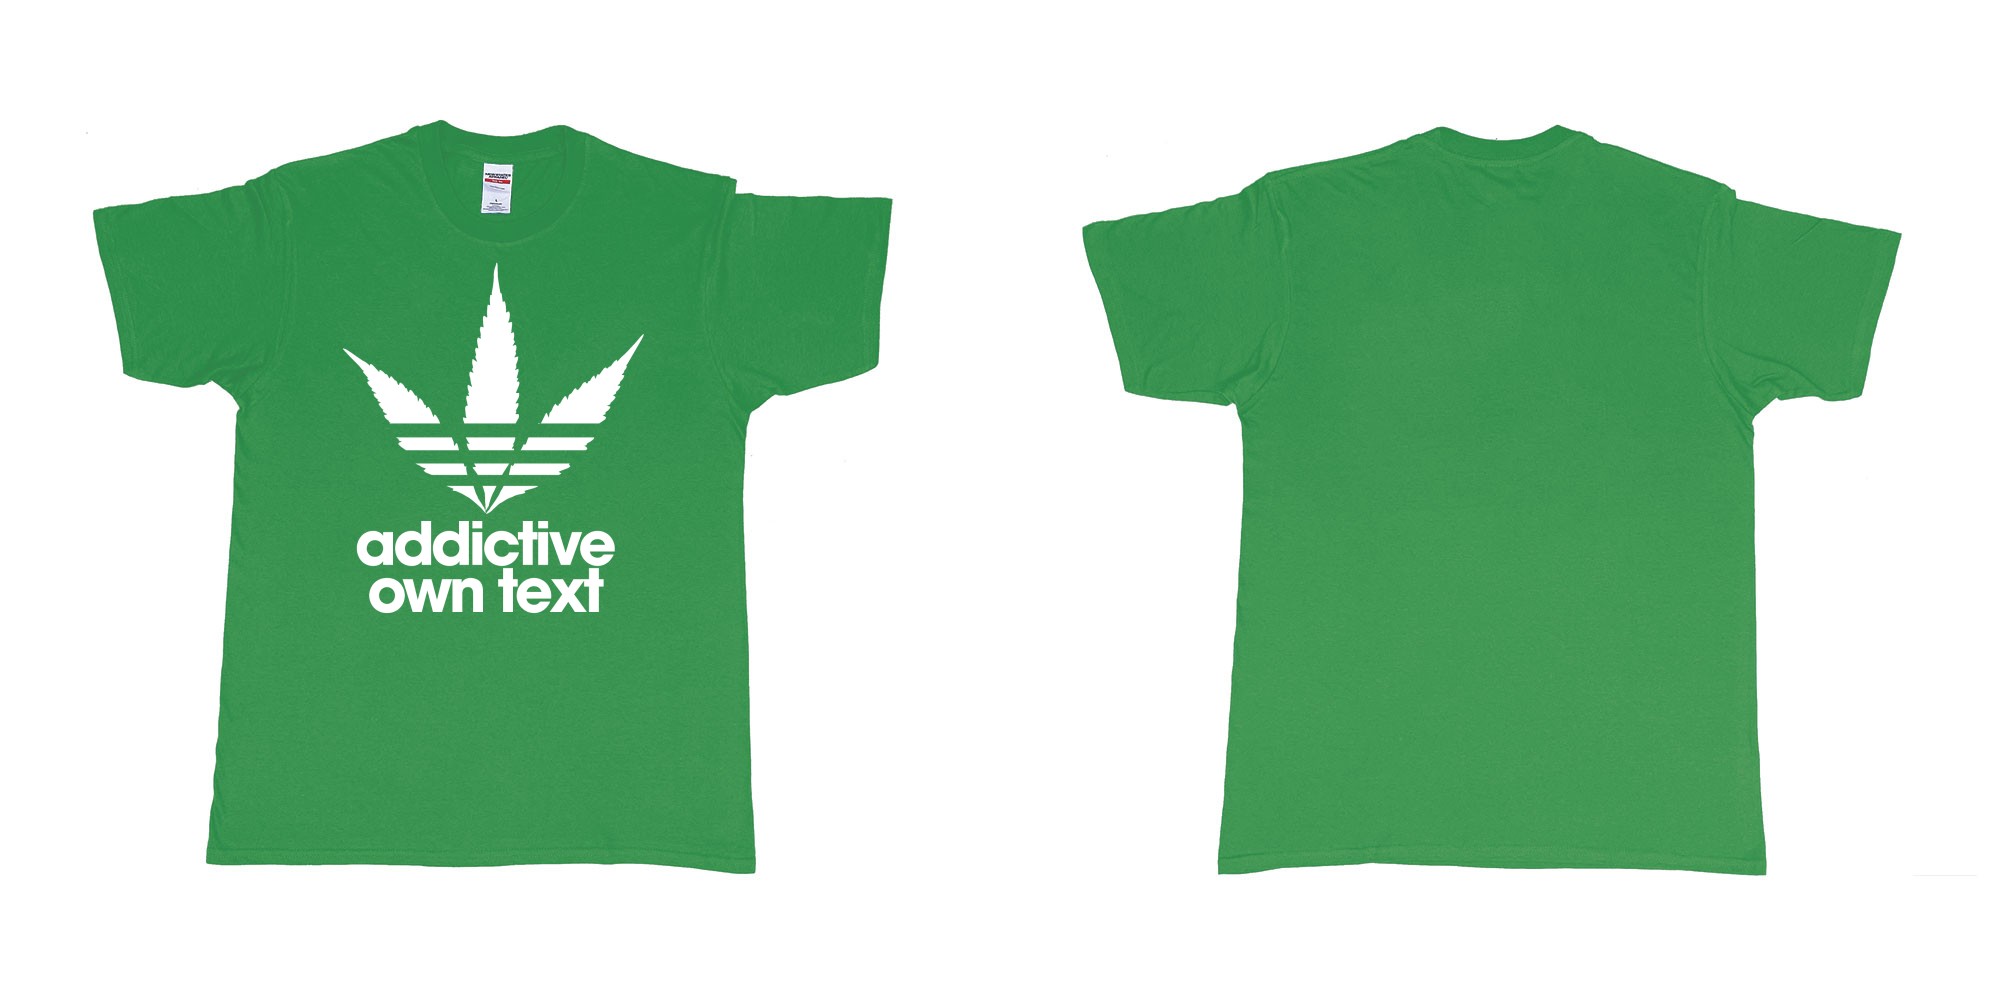 Custom tshirt design adidas ganja addictive own custom printed text in fabric color irish-green choice your own text made in Bali by The Pirate Way